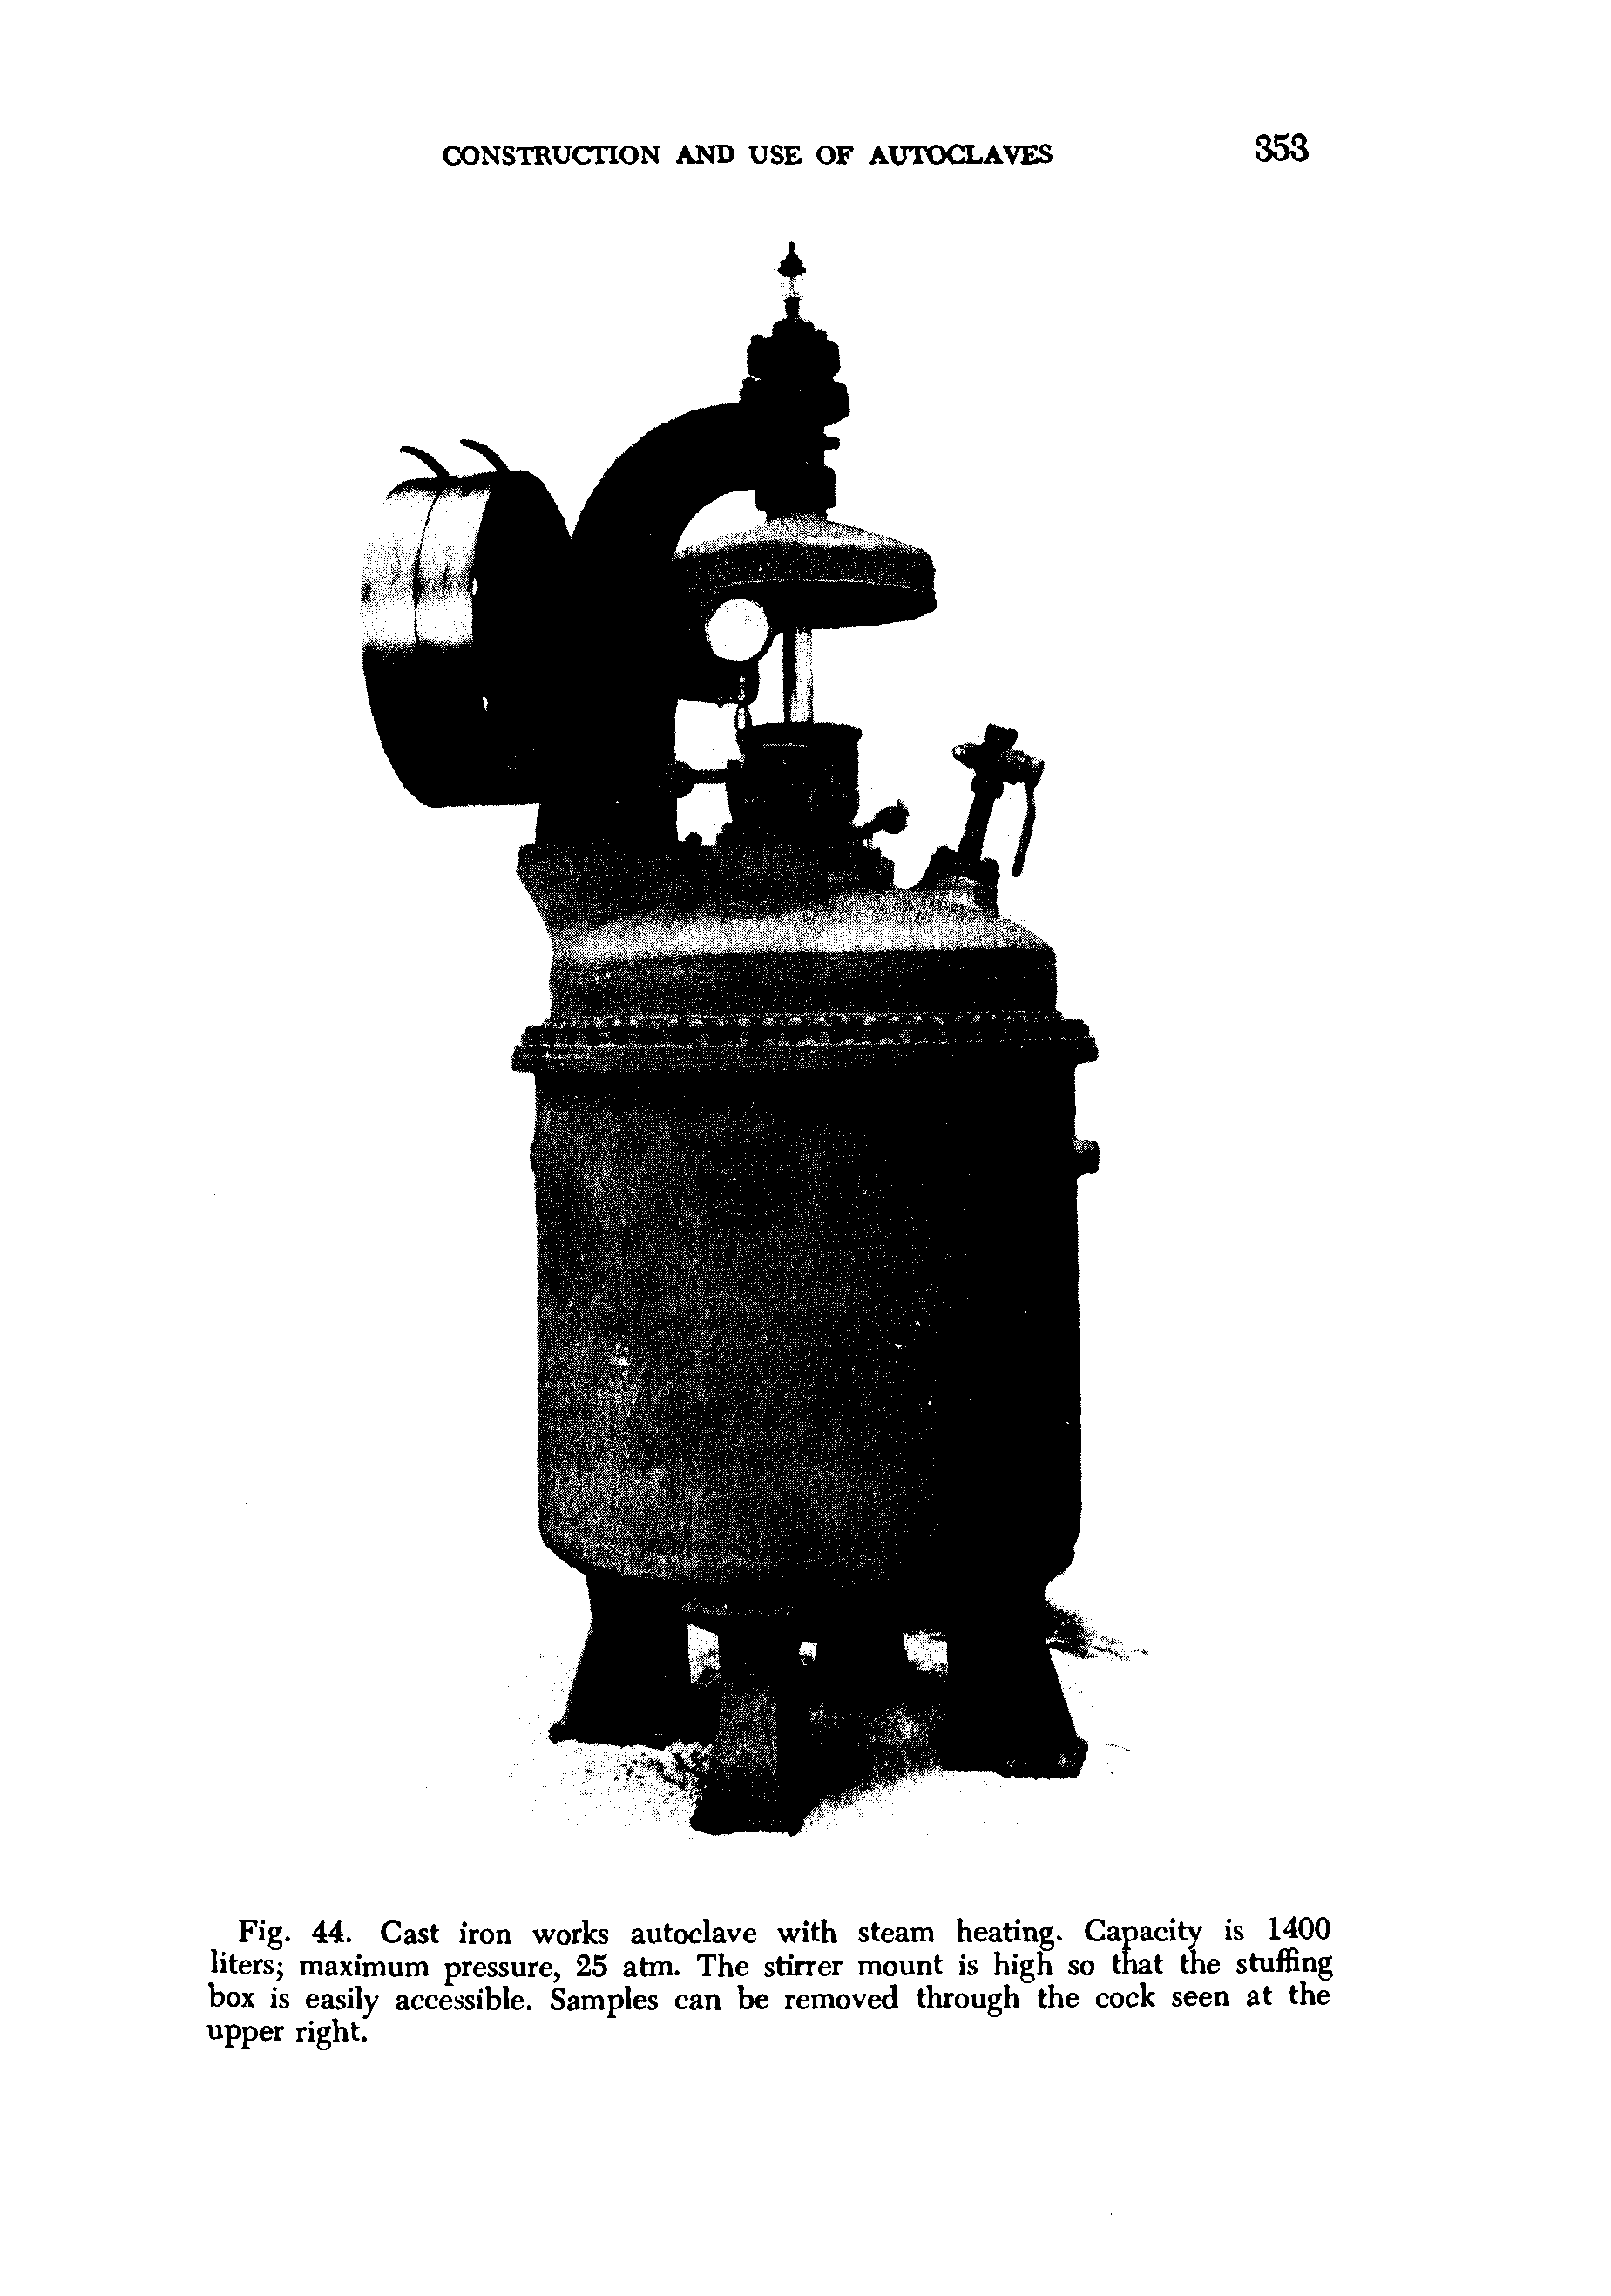 Fig. 44. Cast iron works autoclave with steam heating. Capacity is 1400 liters maximum pressure, 25 atm. The stirrer mount is high so that the stuffing box is easily accessible. Samples can be removed through the cock seen at the upper right.